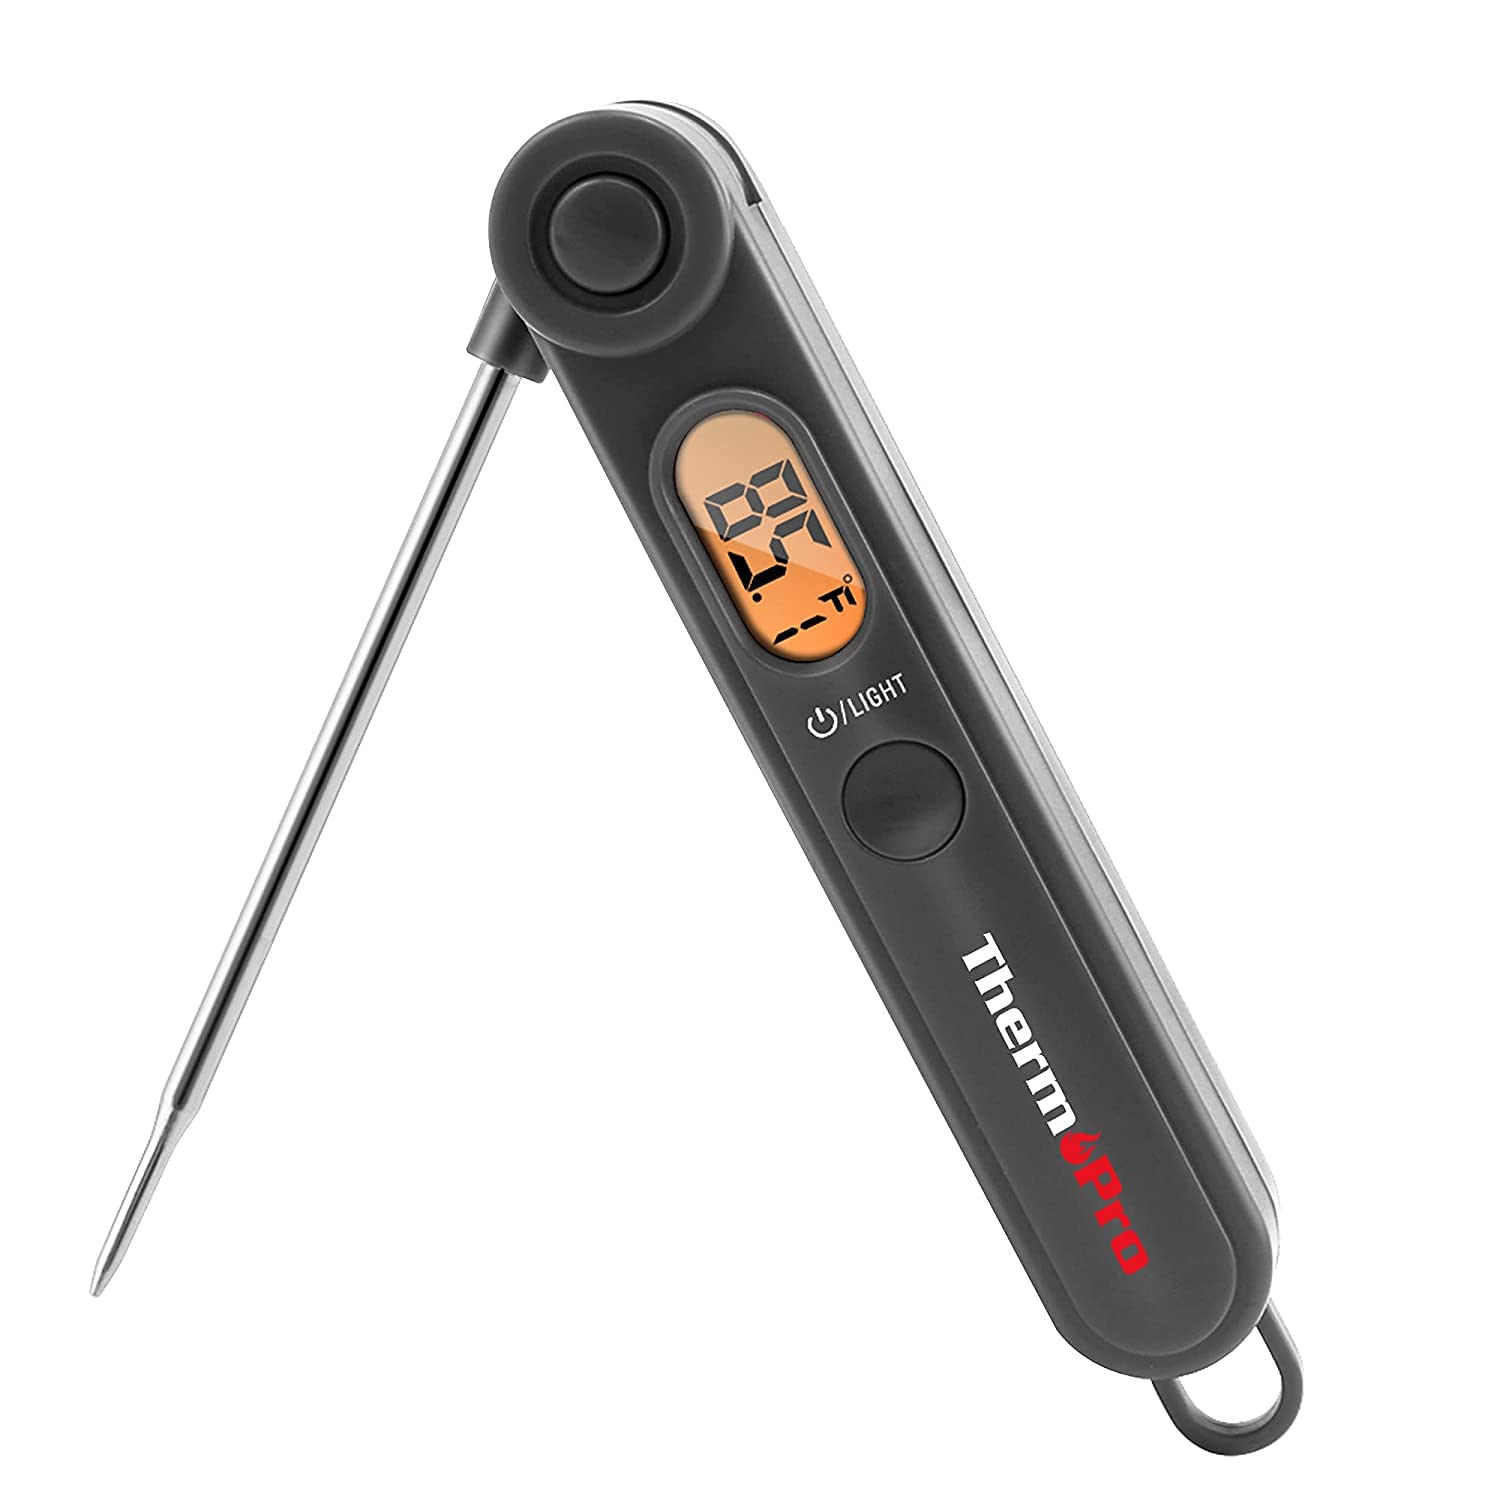 The Best Digital Meat Thermometers